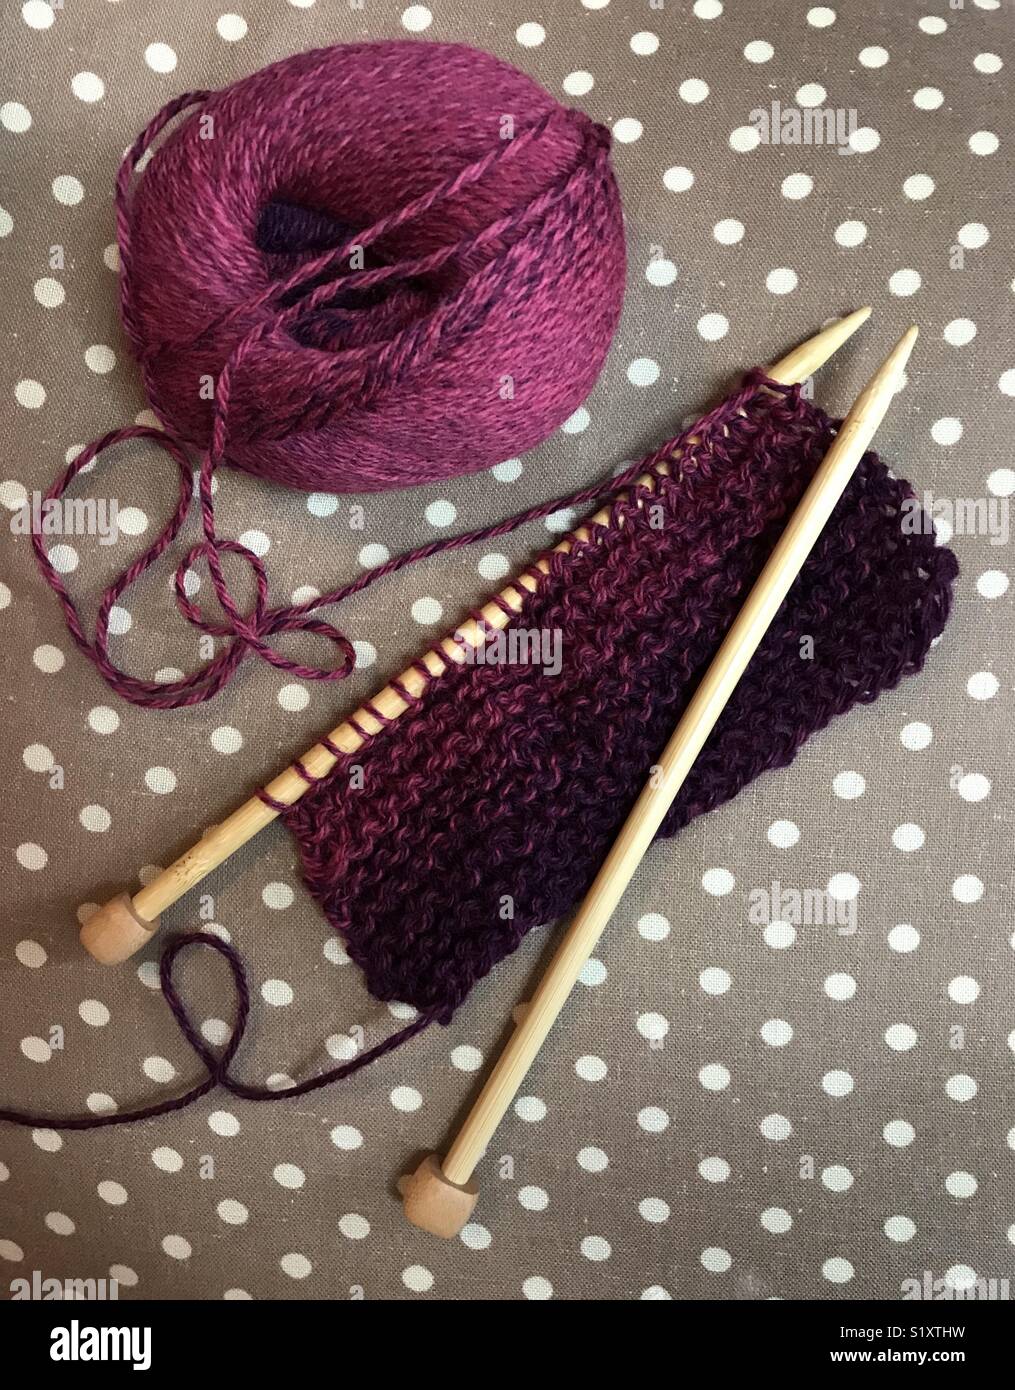 Starting to knit a raspberry colored wool scarf. Stock Photo